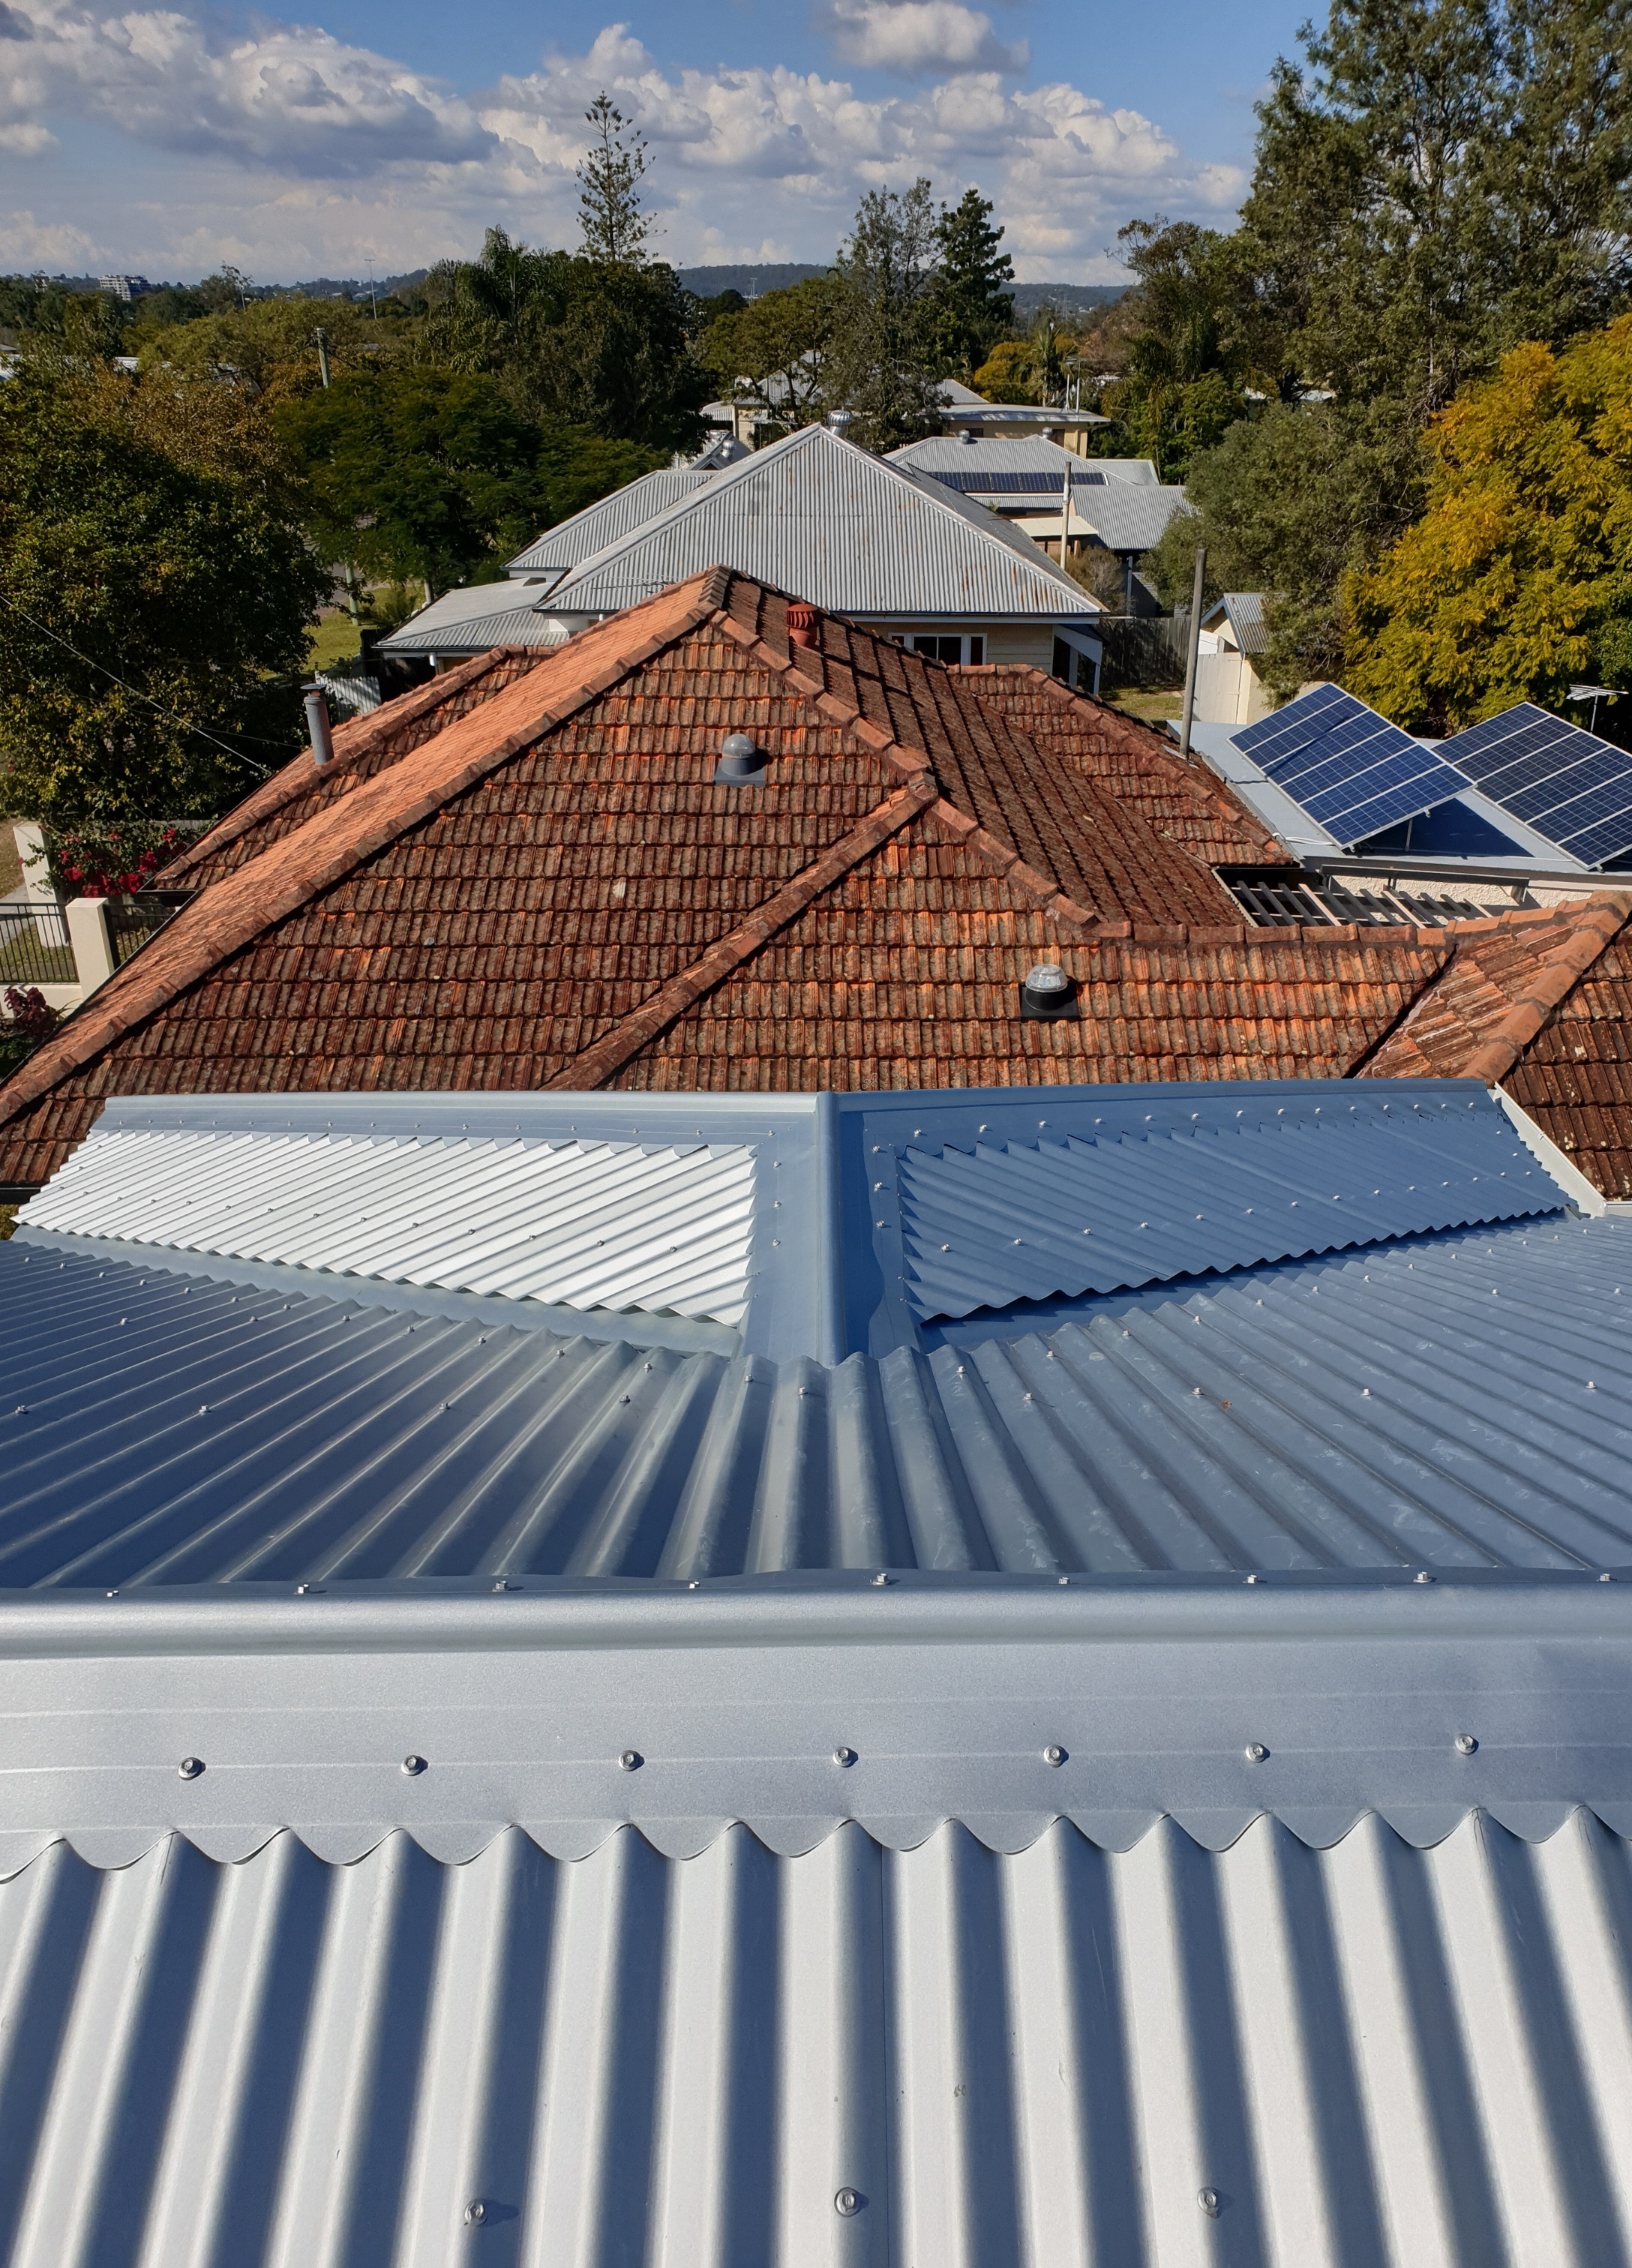 New metal roof with old tile roof in background